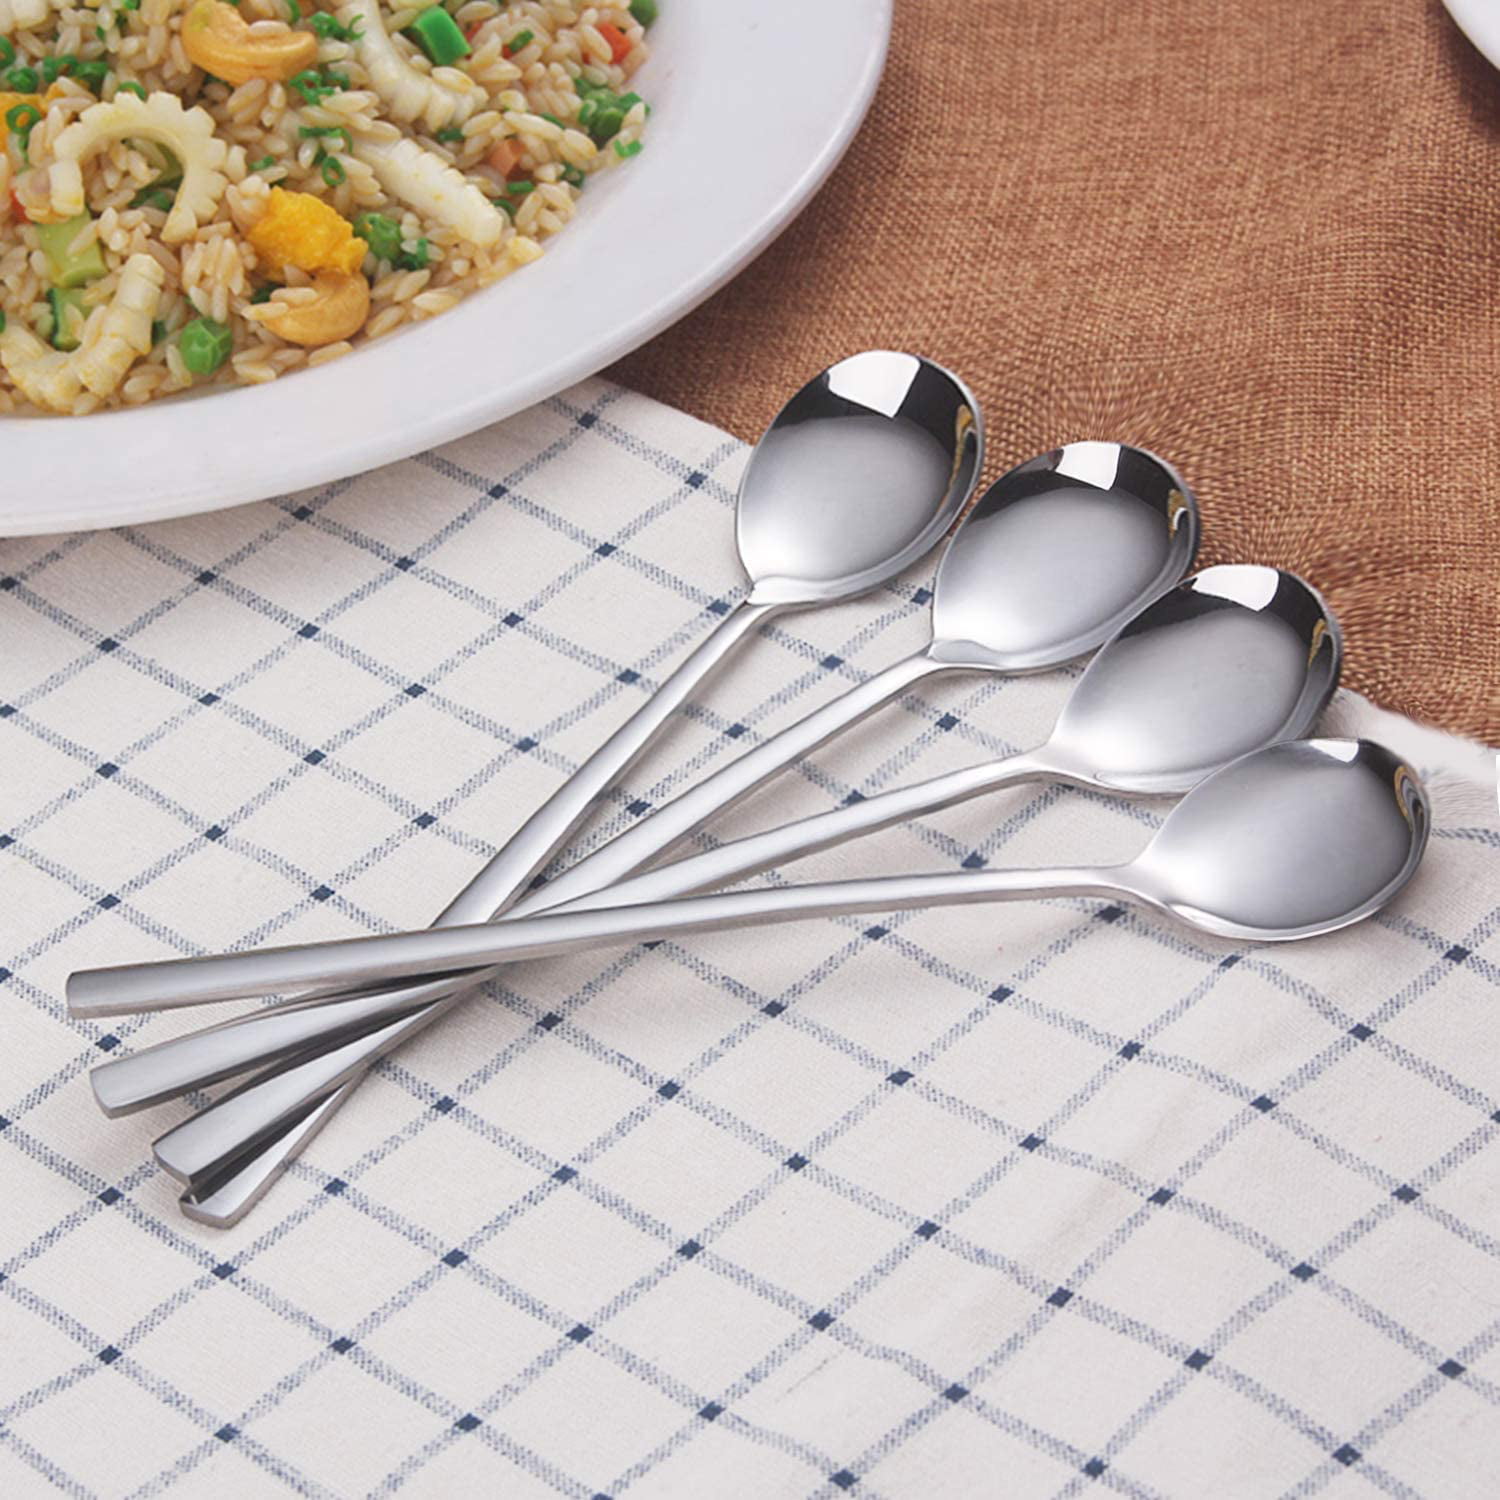 Food Grade 18/10 Stainless Steel Spoon, Children's Eating Spoon, Soup  Spoon, Meal Spoon, Long Handle Spoon, Household HY9195 for restaurant  kitchen